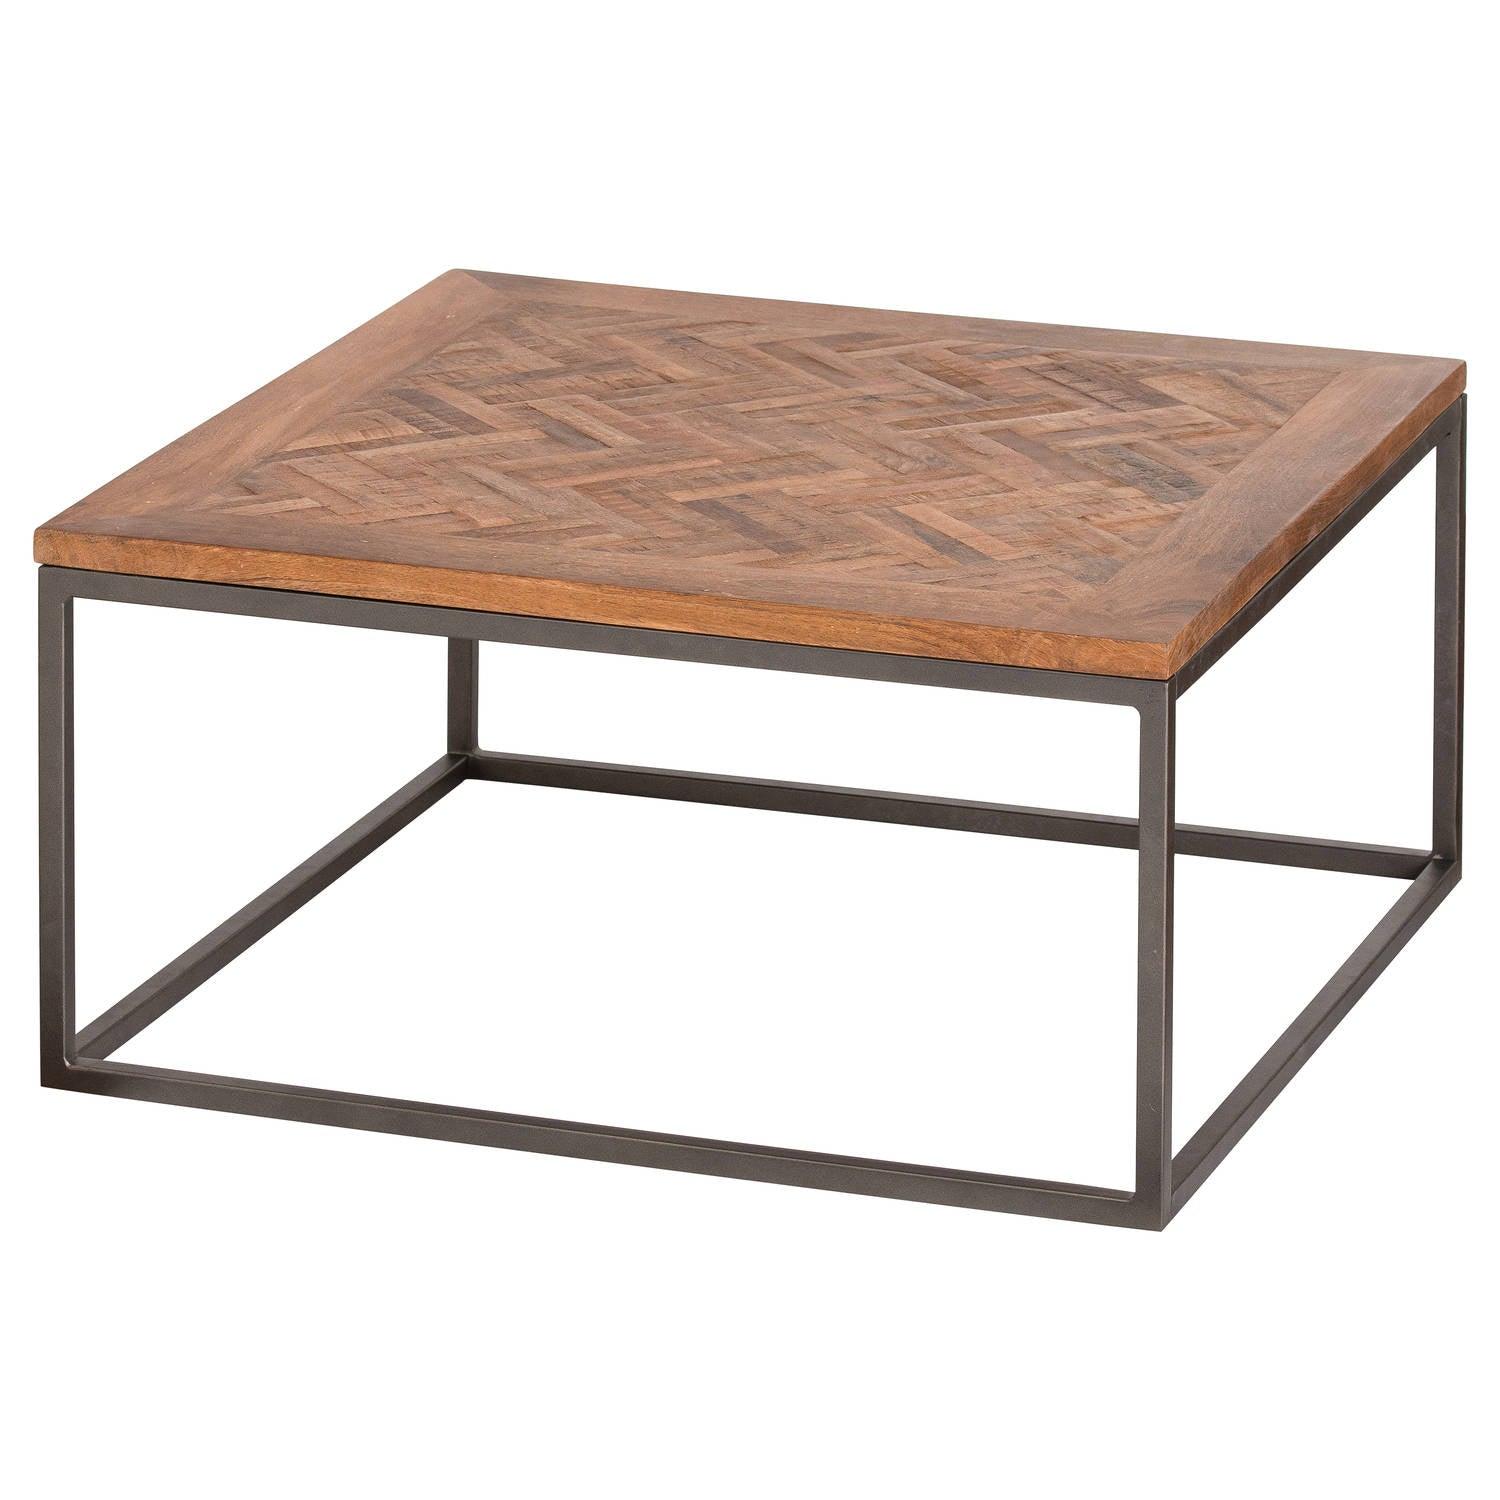 Hoxton Collection Coffee Table With Parquet Top - Vookoo Lifestyle